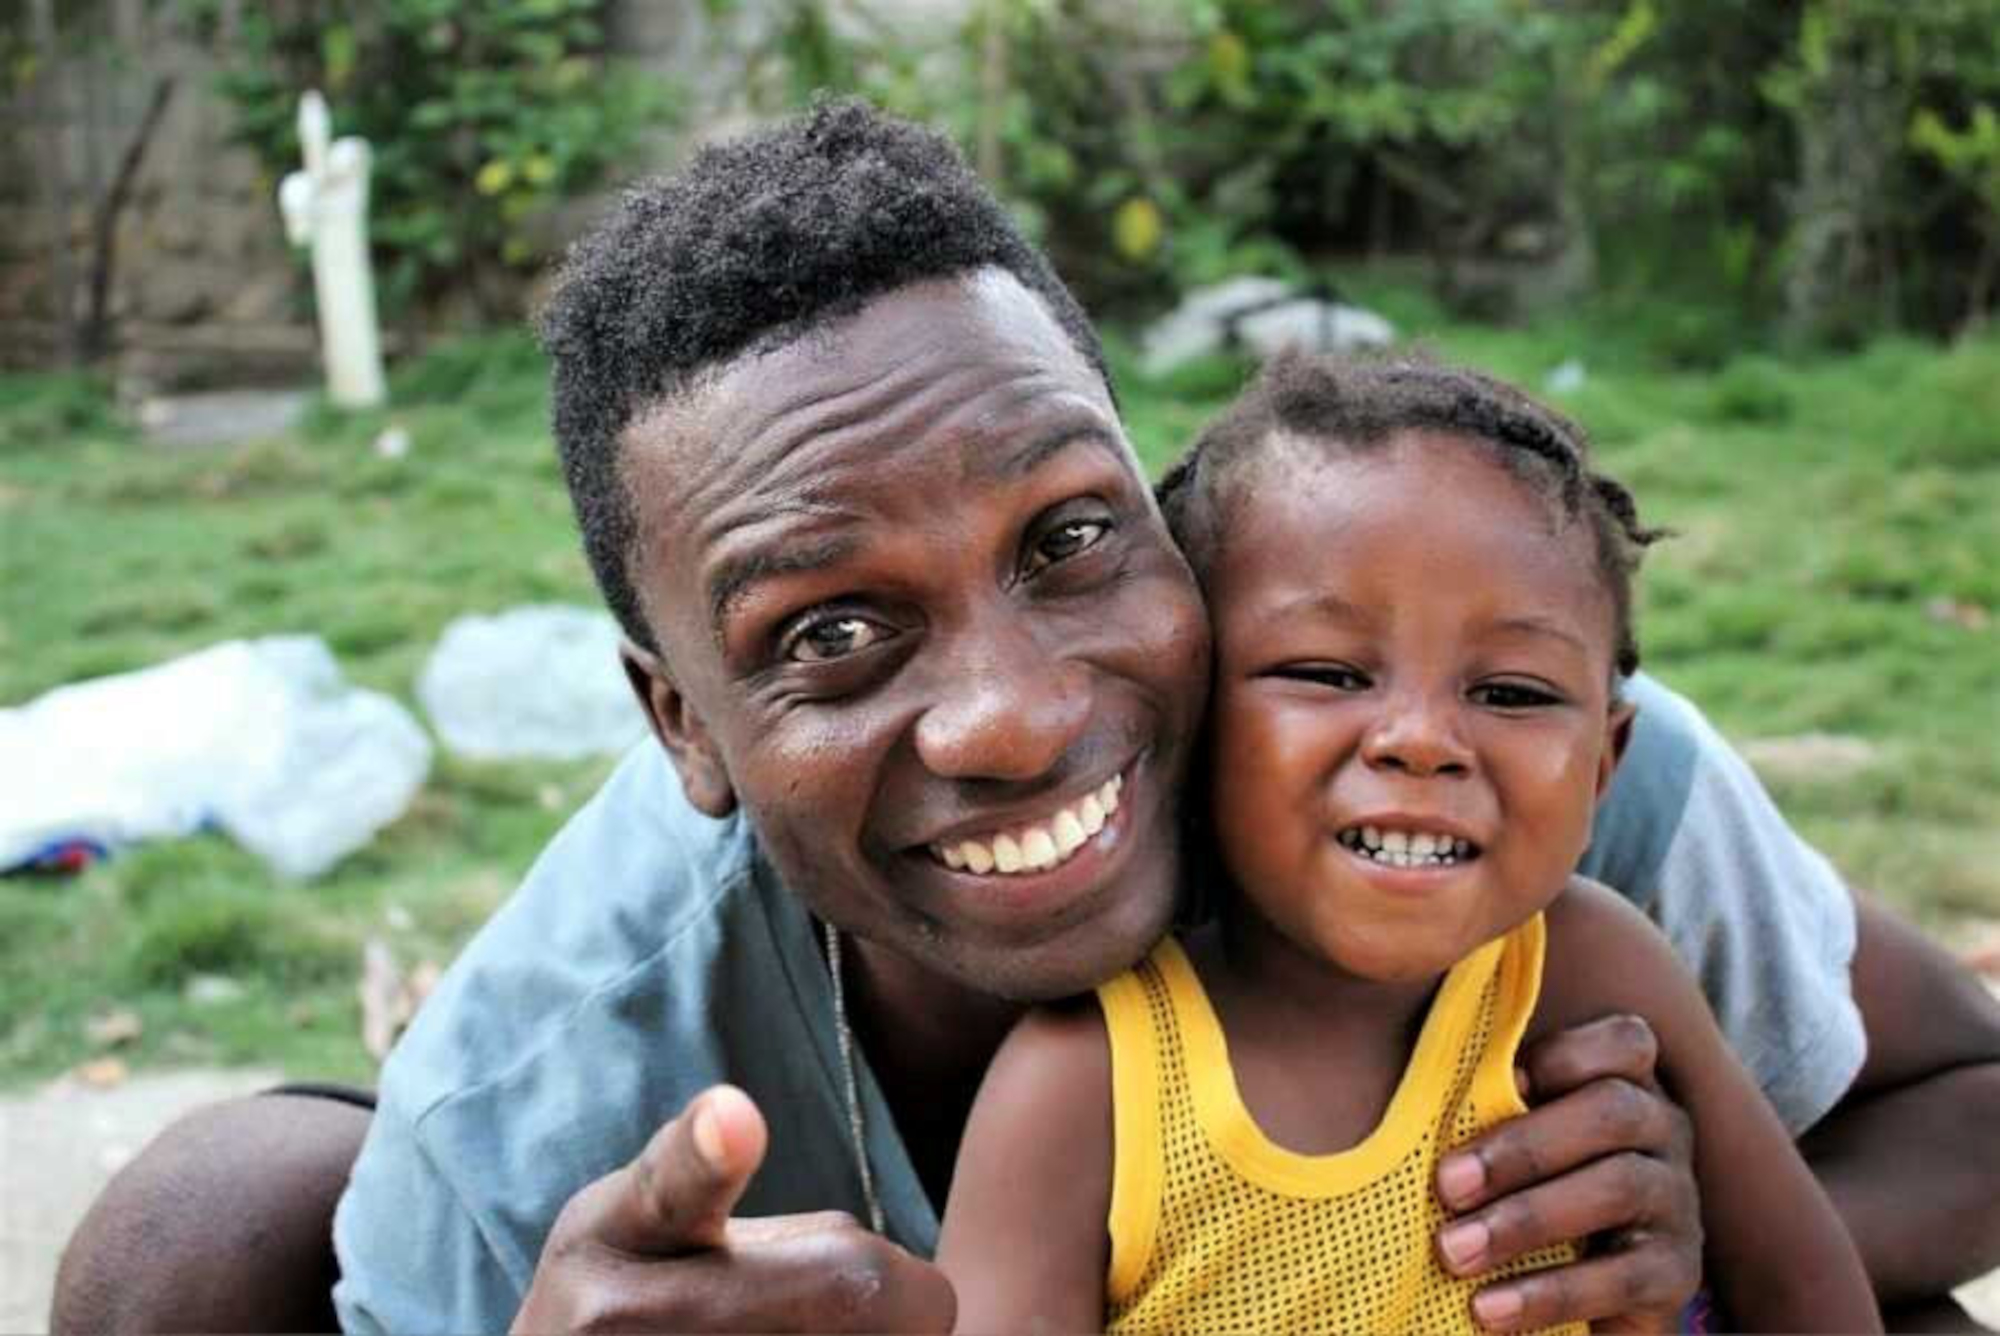 Man Raises Funds To Adopt Haitian Baby He Saved From a Trash Can